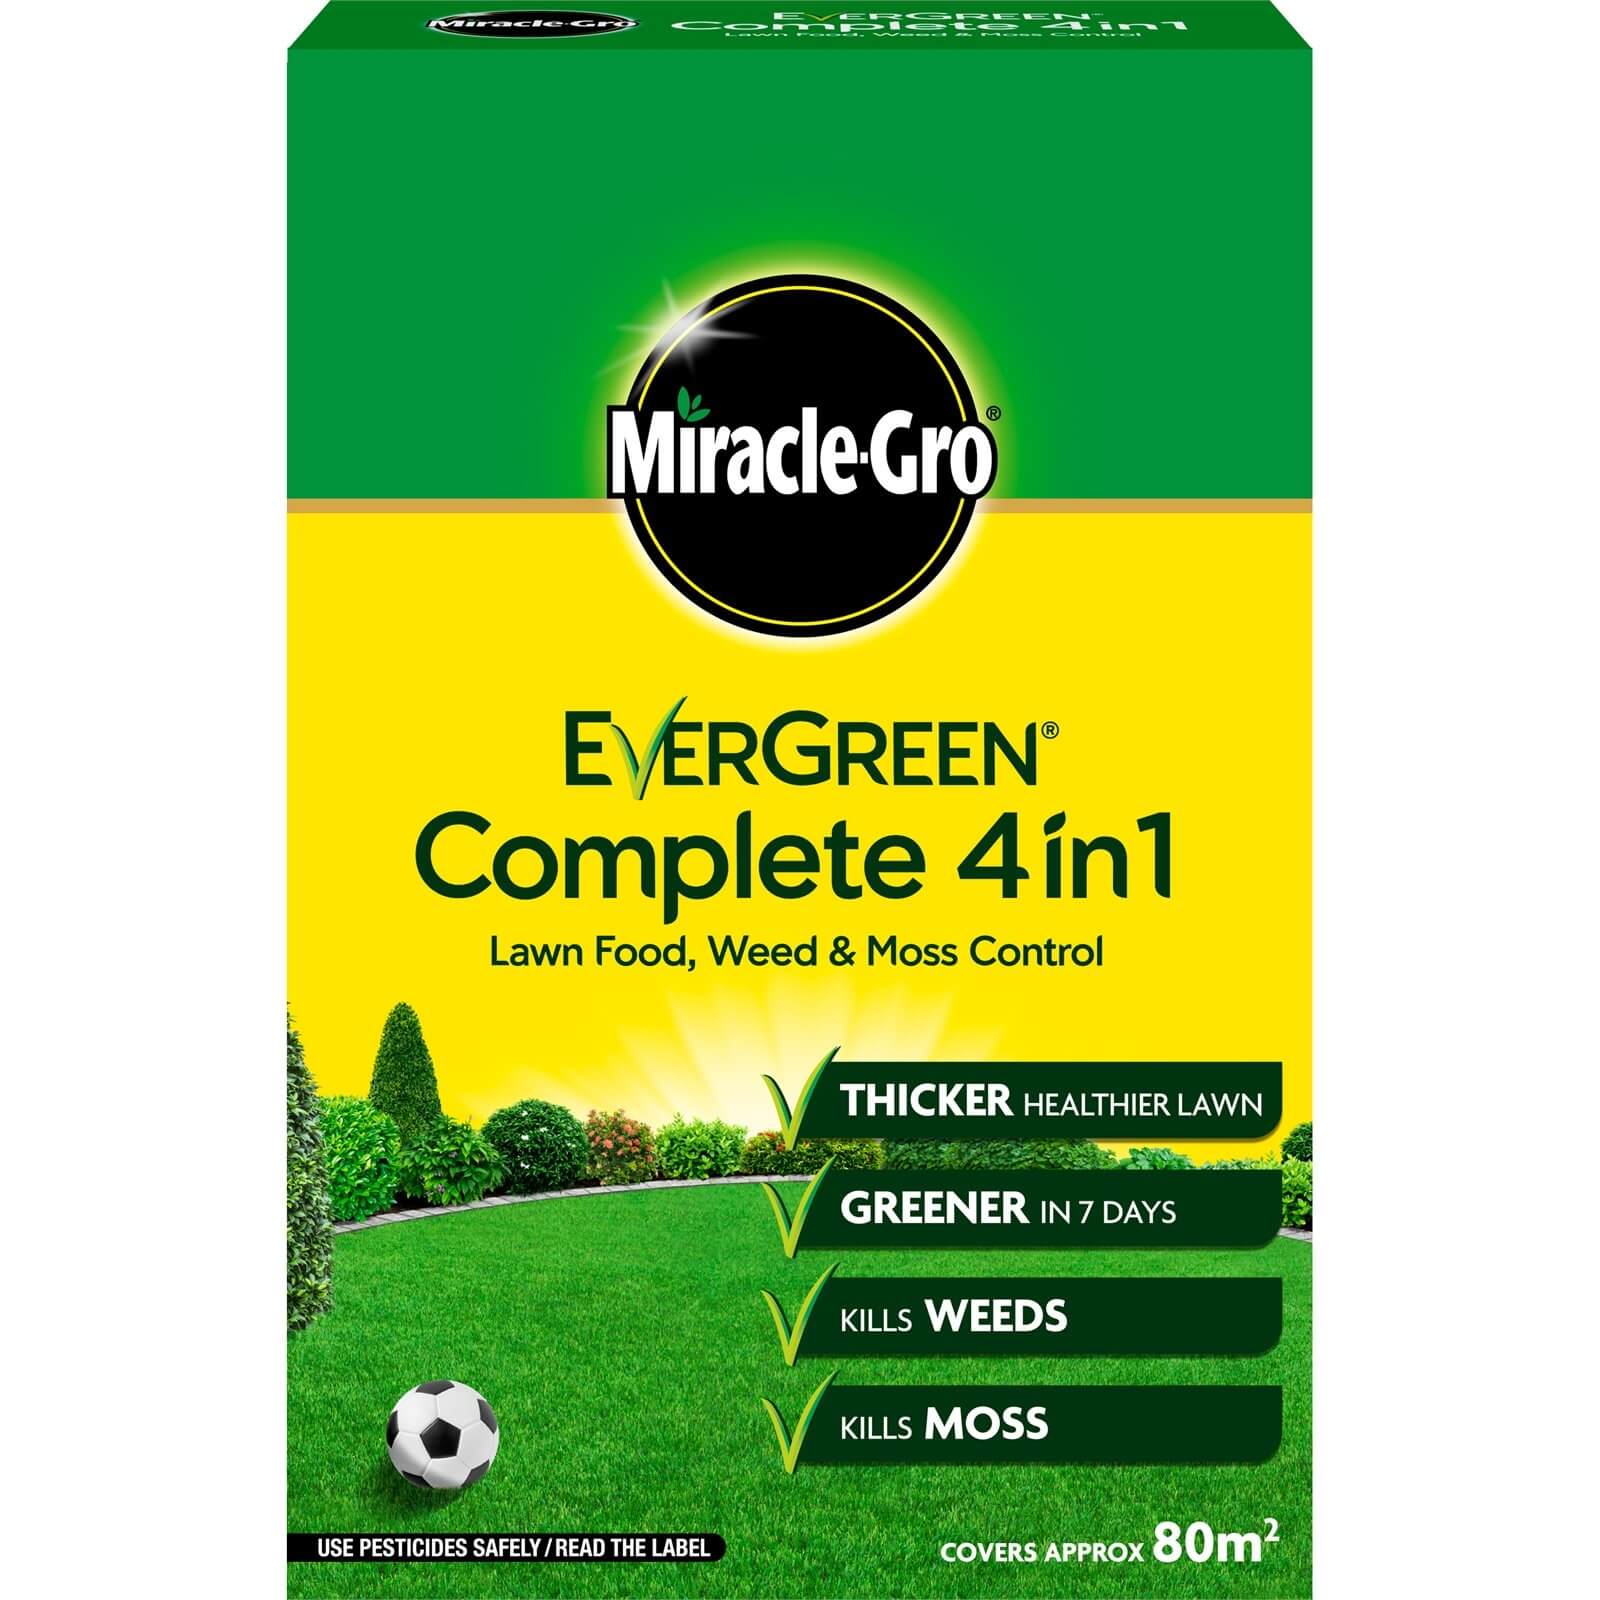 Miracle-Gro EverGreen Complete 4-in-1 Lawn Food, Weed & Moss Killer - 80m²